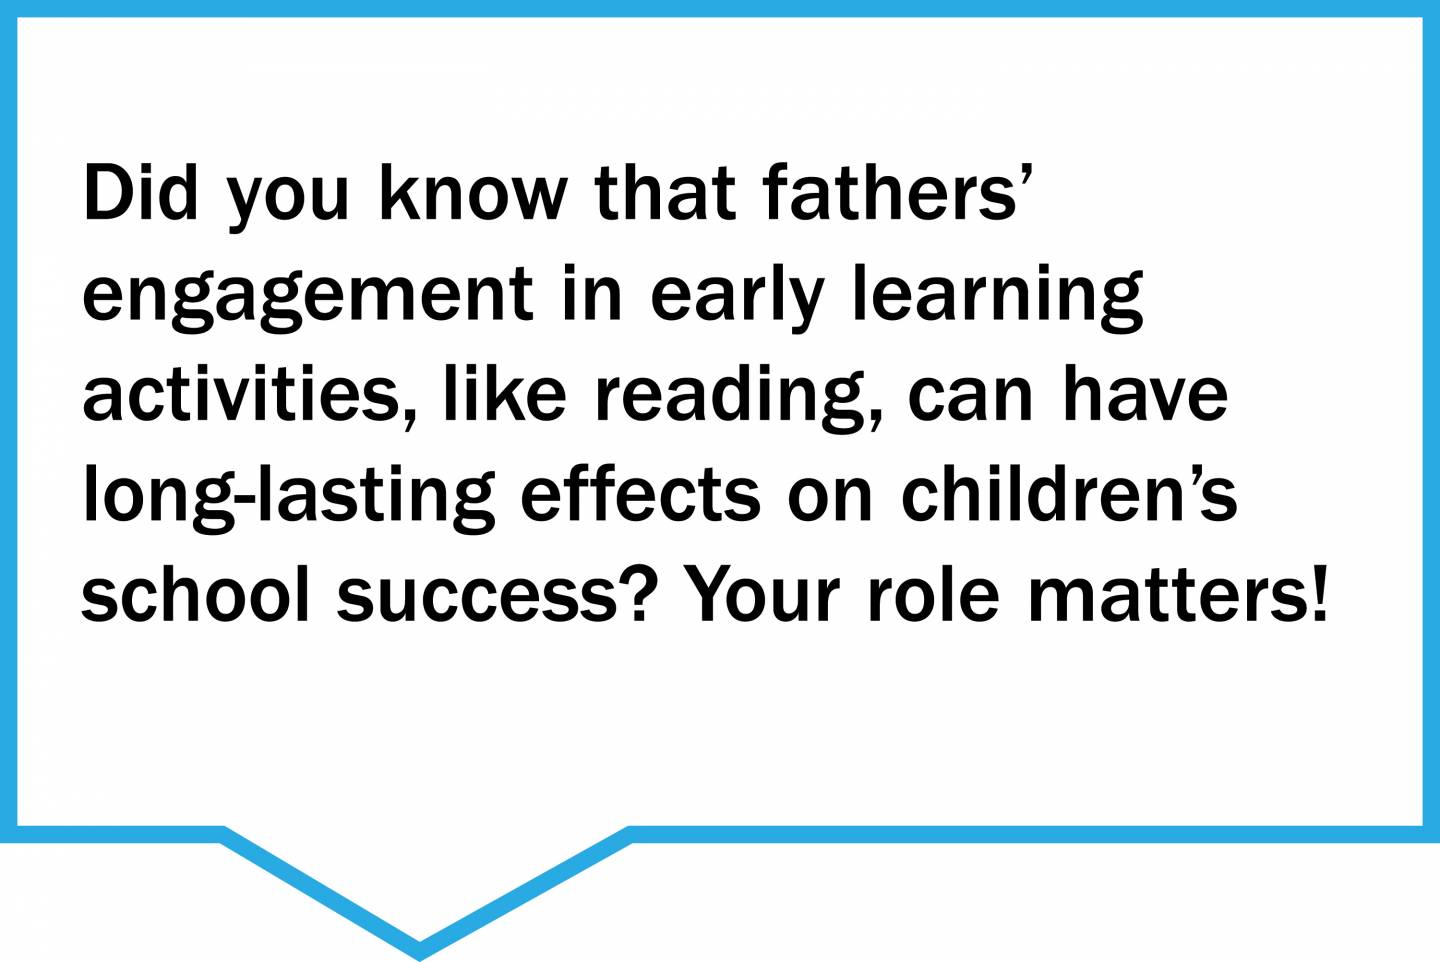 Did you know that fathers’  engagement in early learning  activities, like reading, can have long-lasting effects on children’s school success? Your role matters!